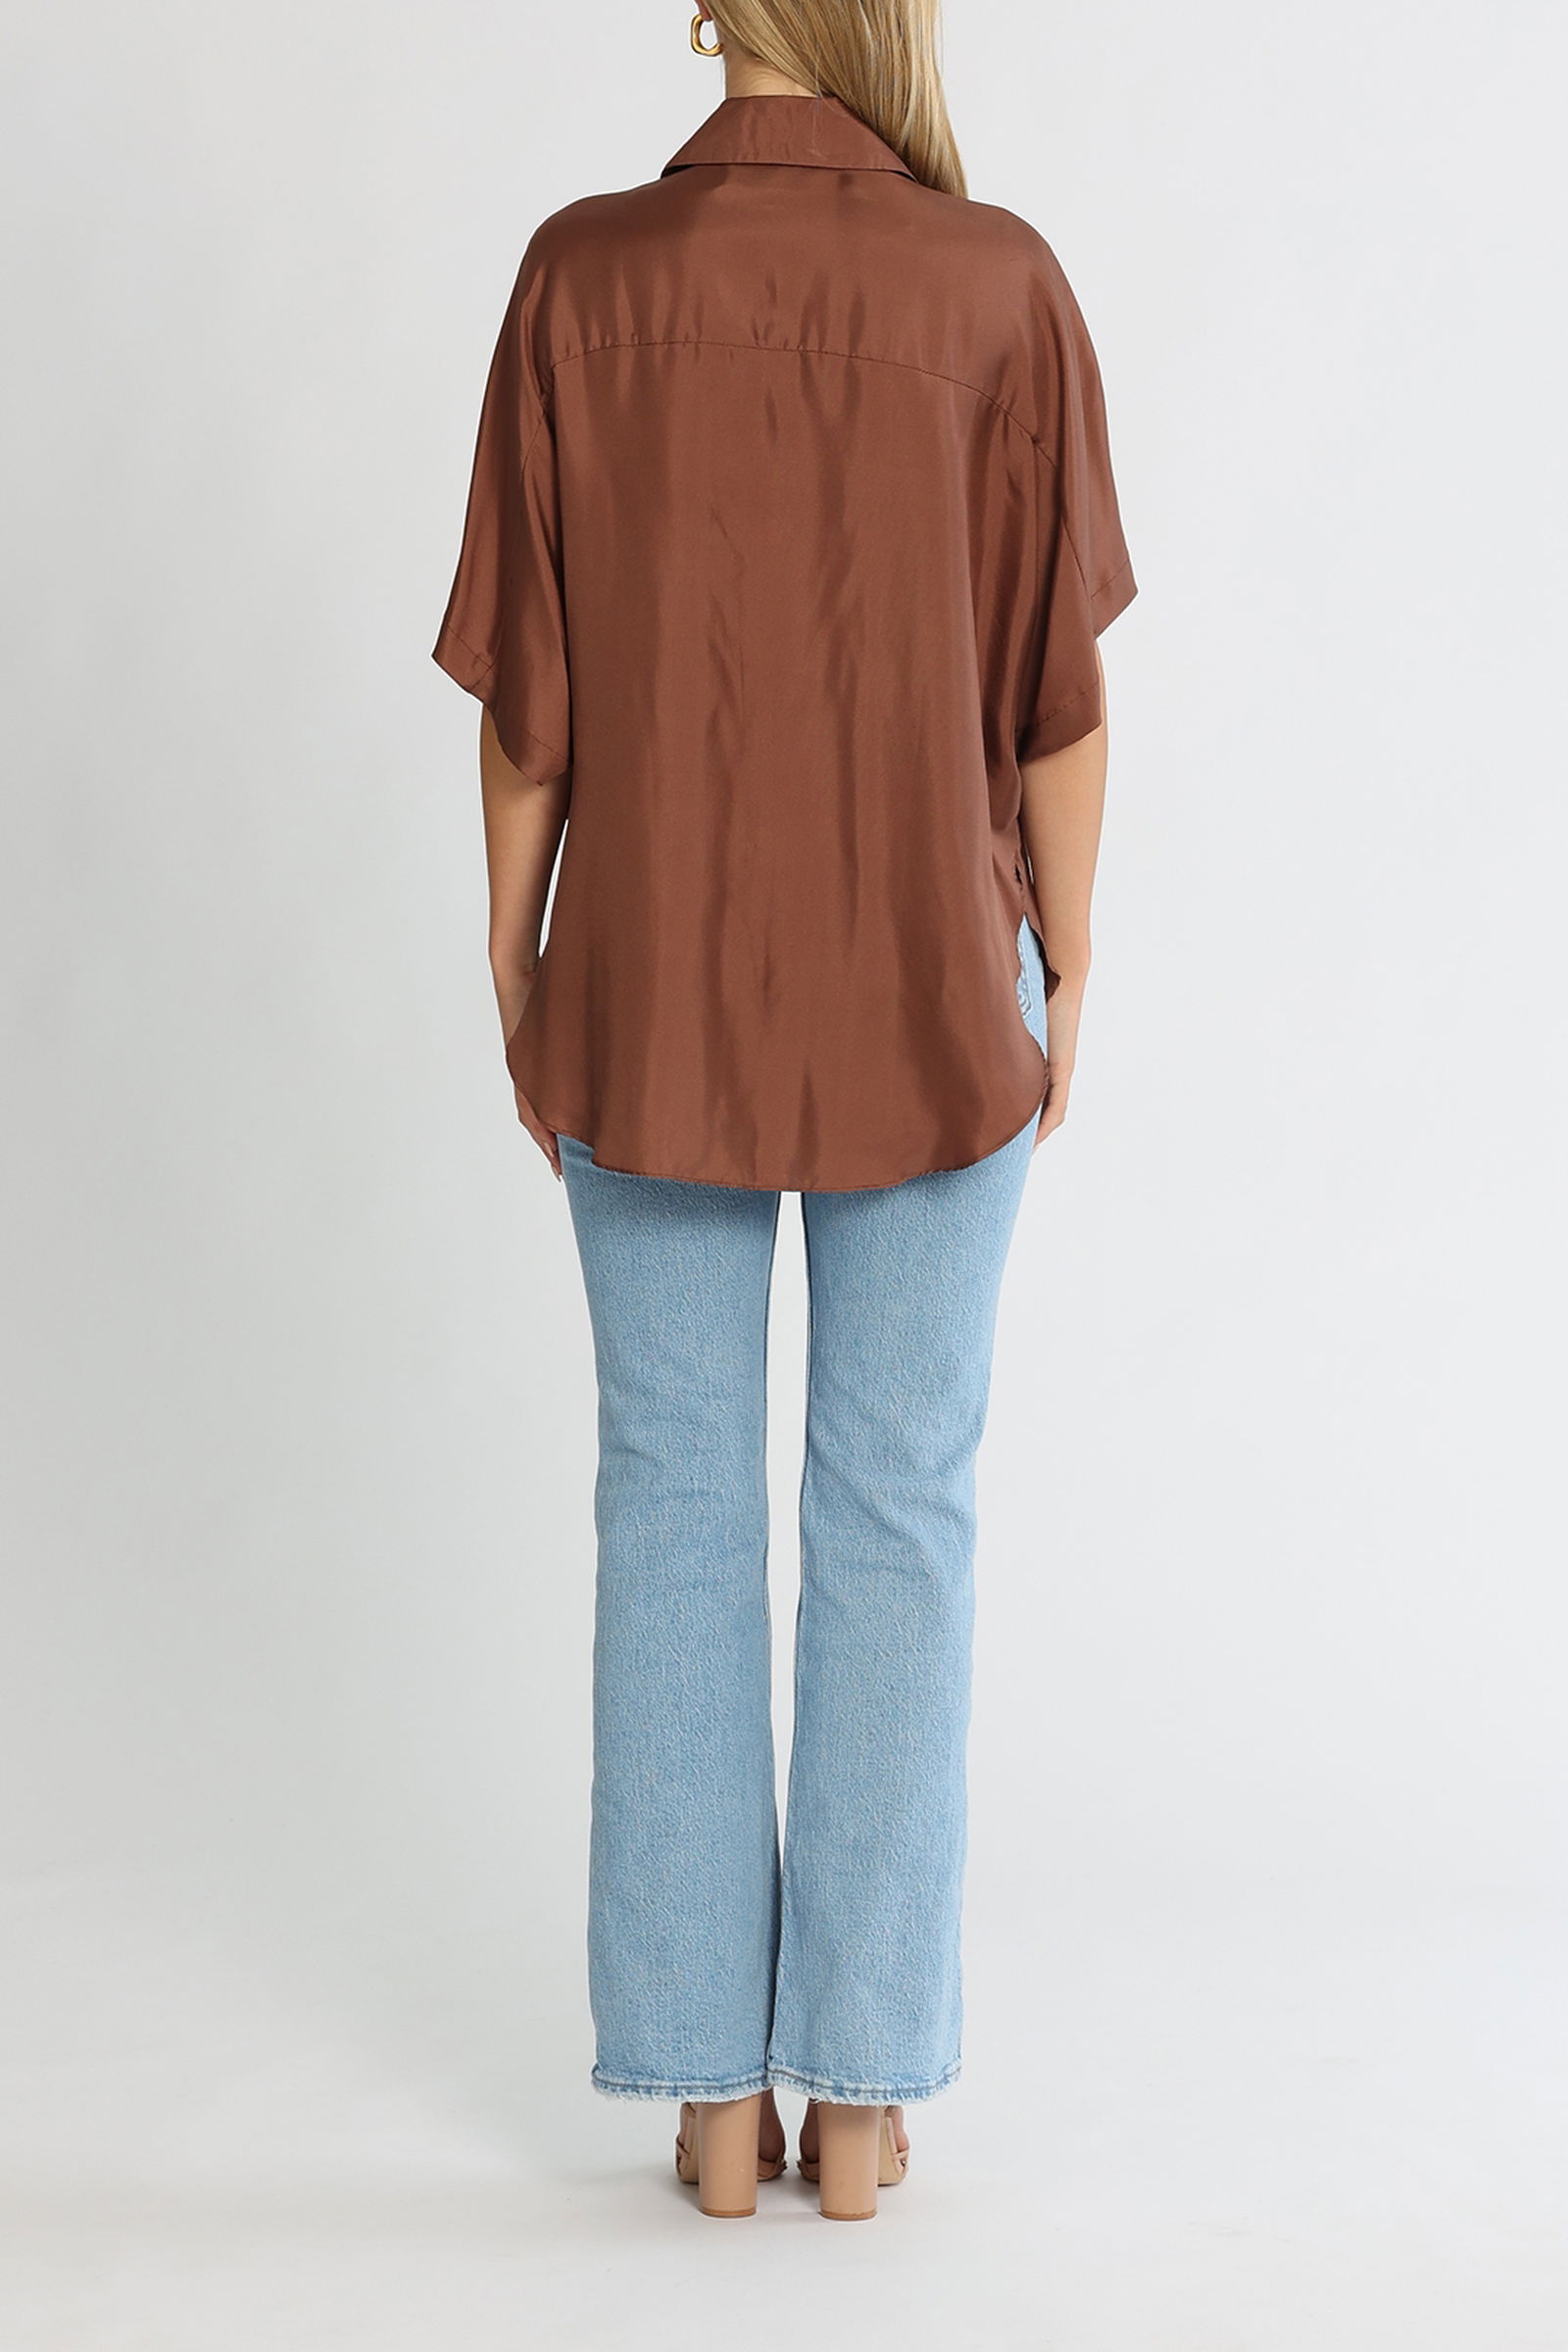 Ginger and Smart Immersion Shirt Chestnut Relaxed Fit